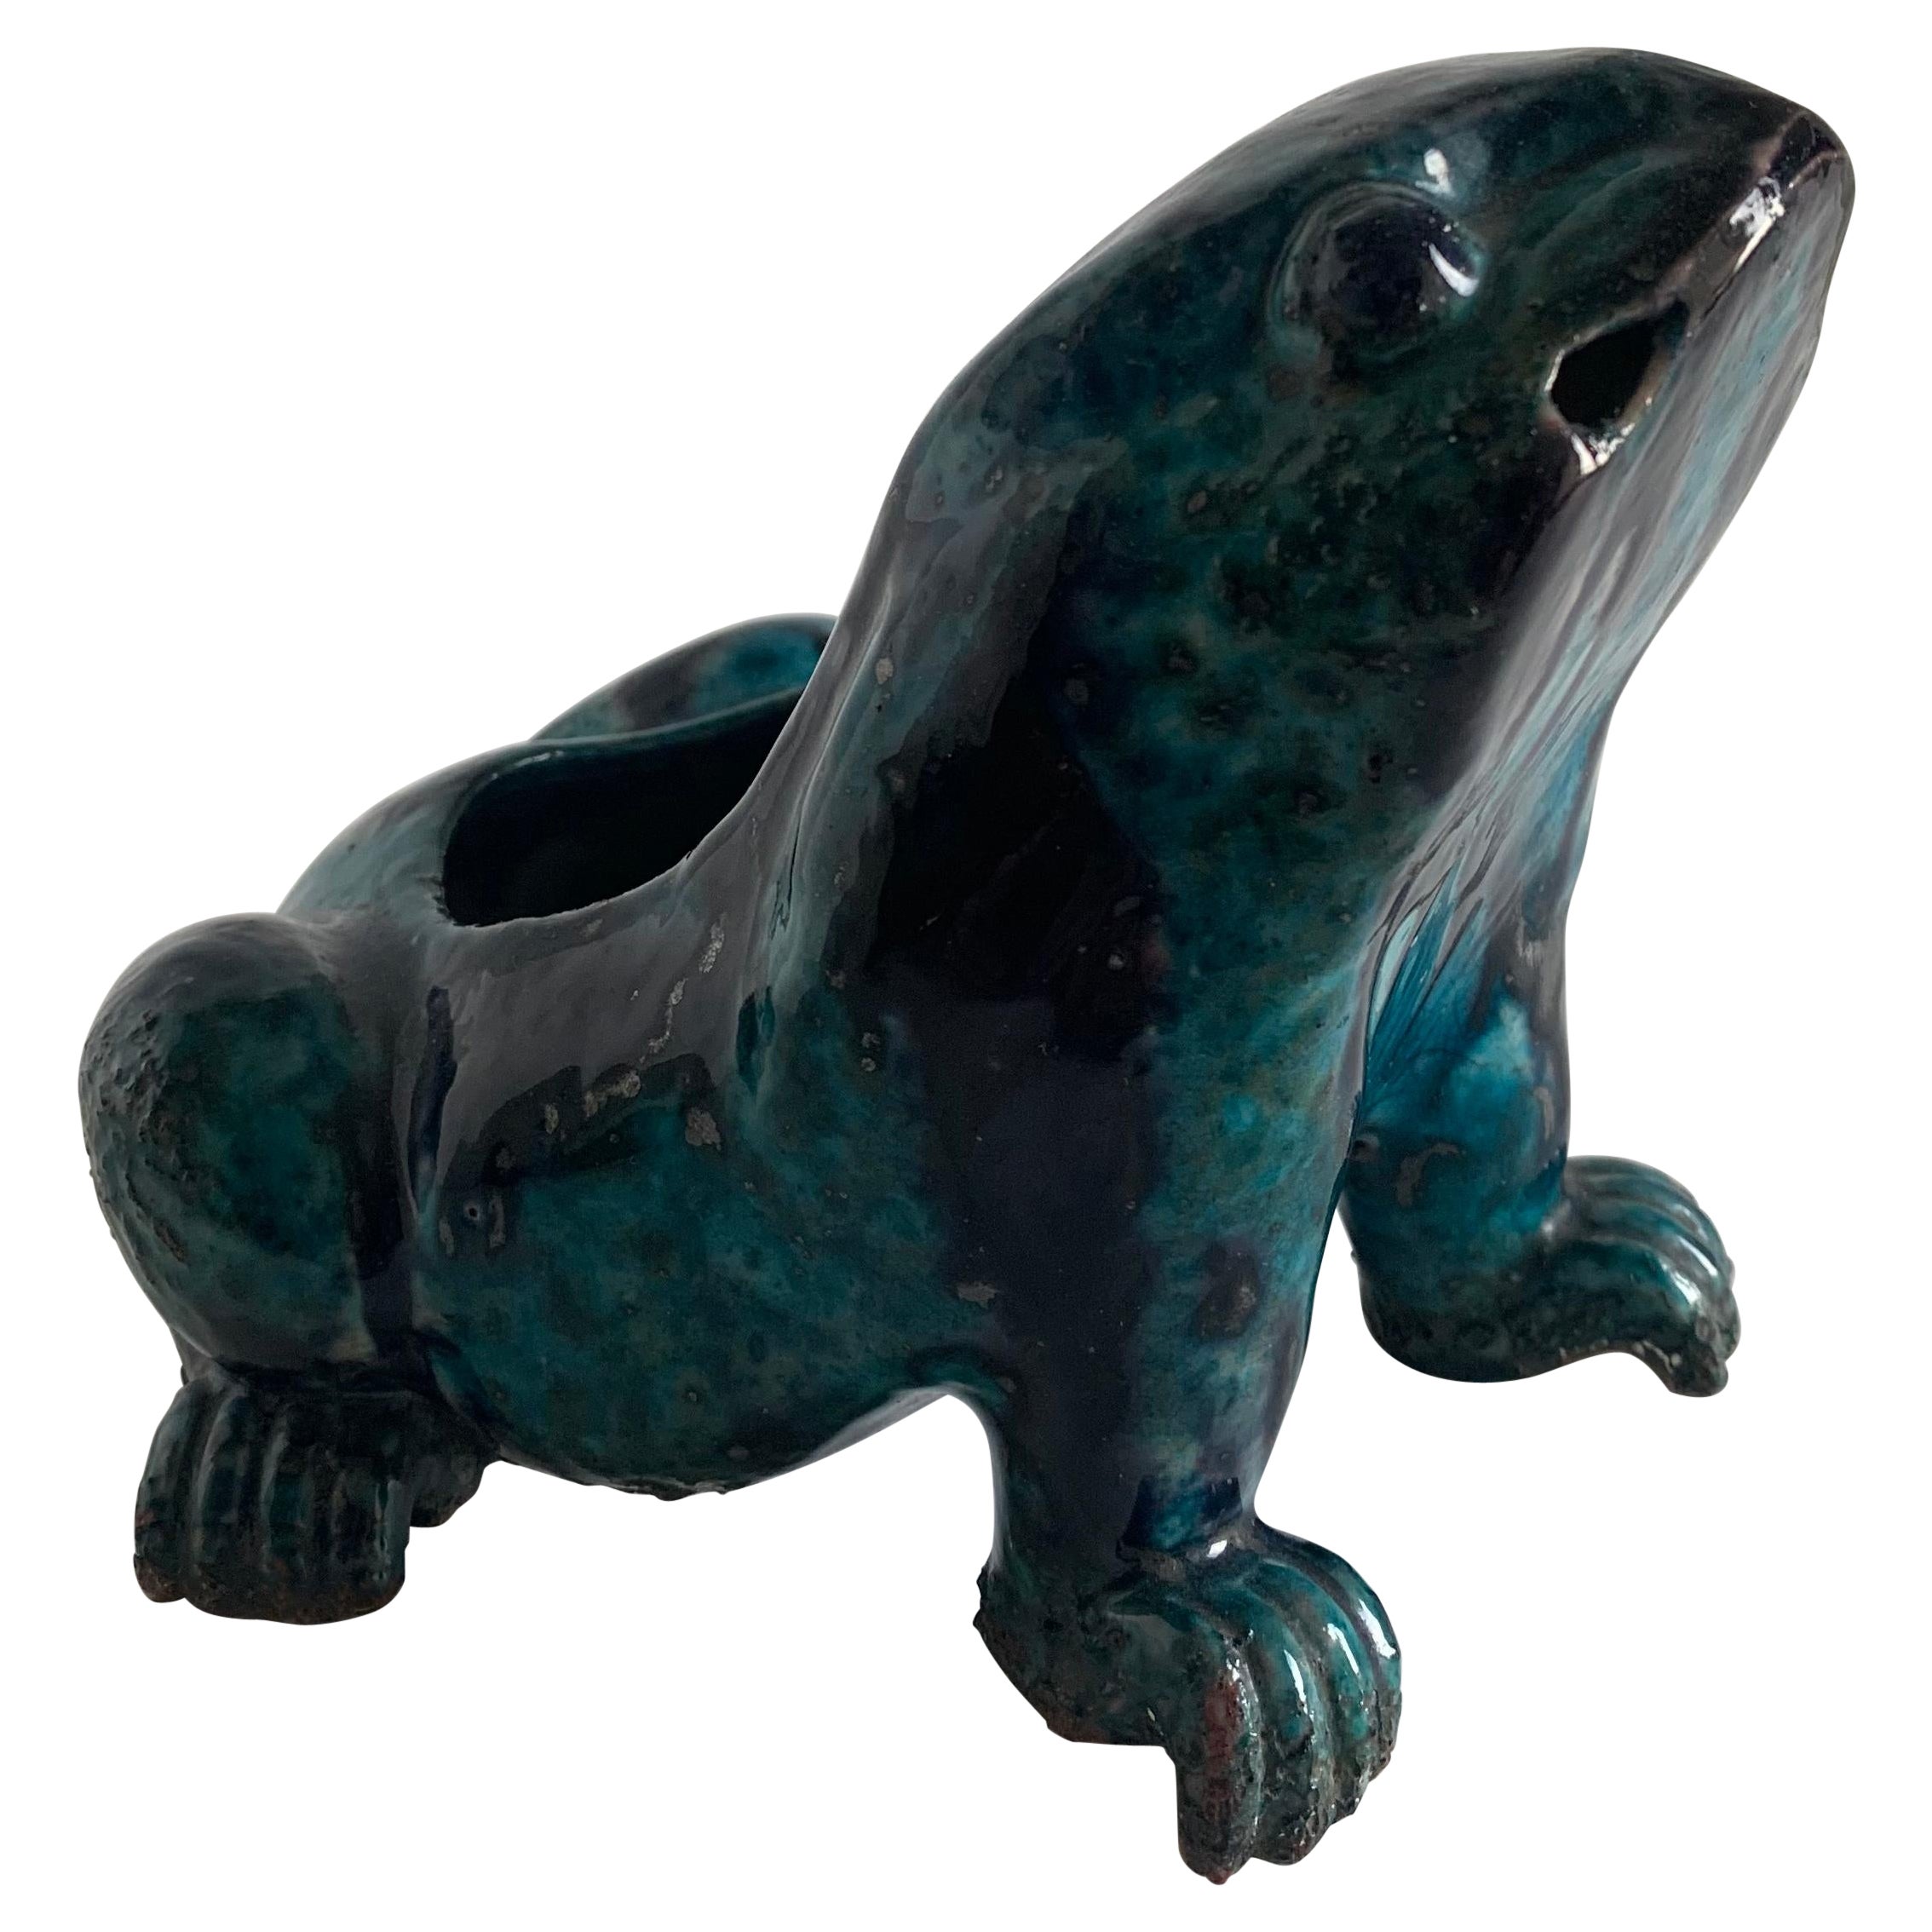 Chinese Kangxi Period Porcelain Glazed Figure of a Frog